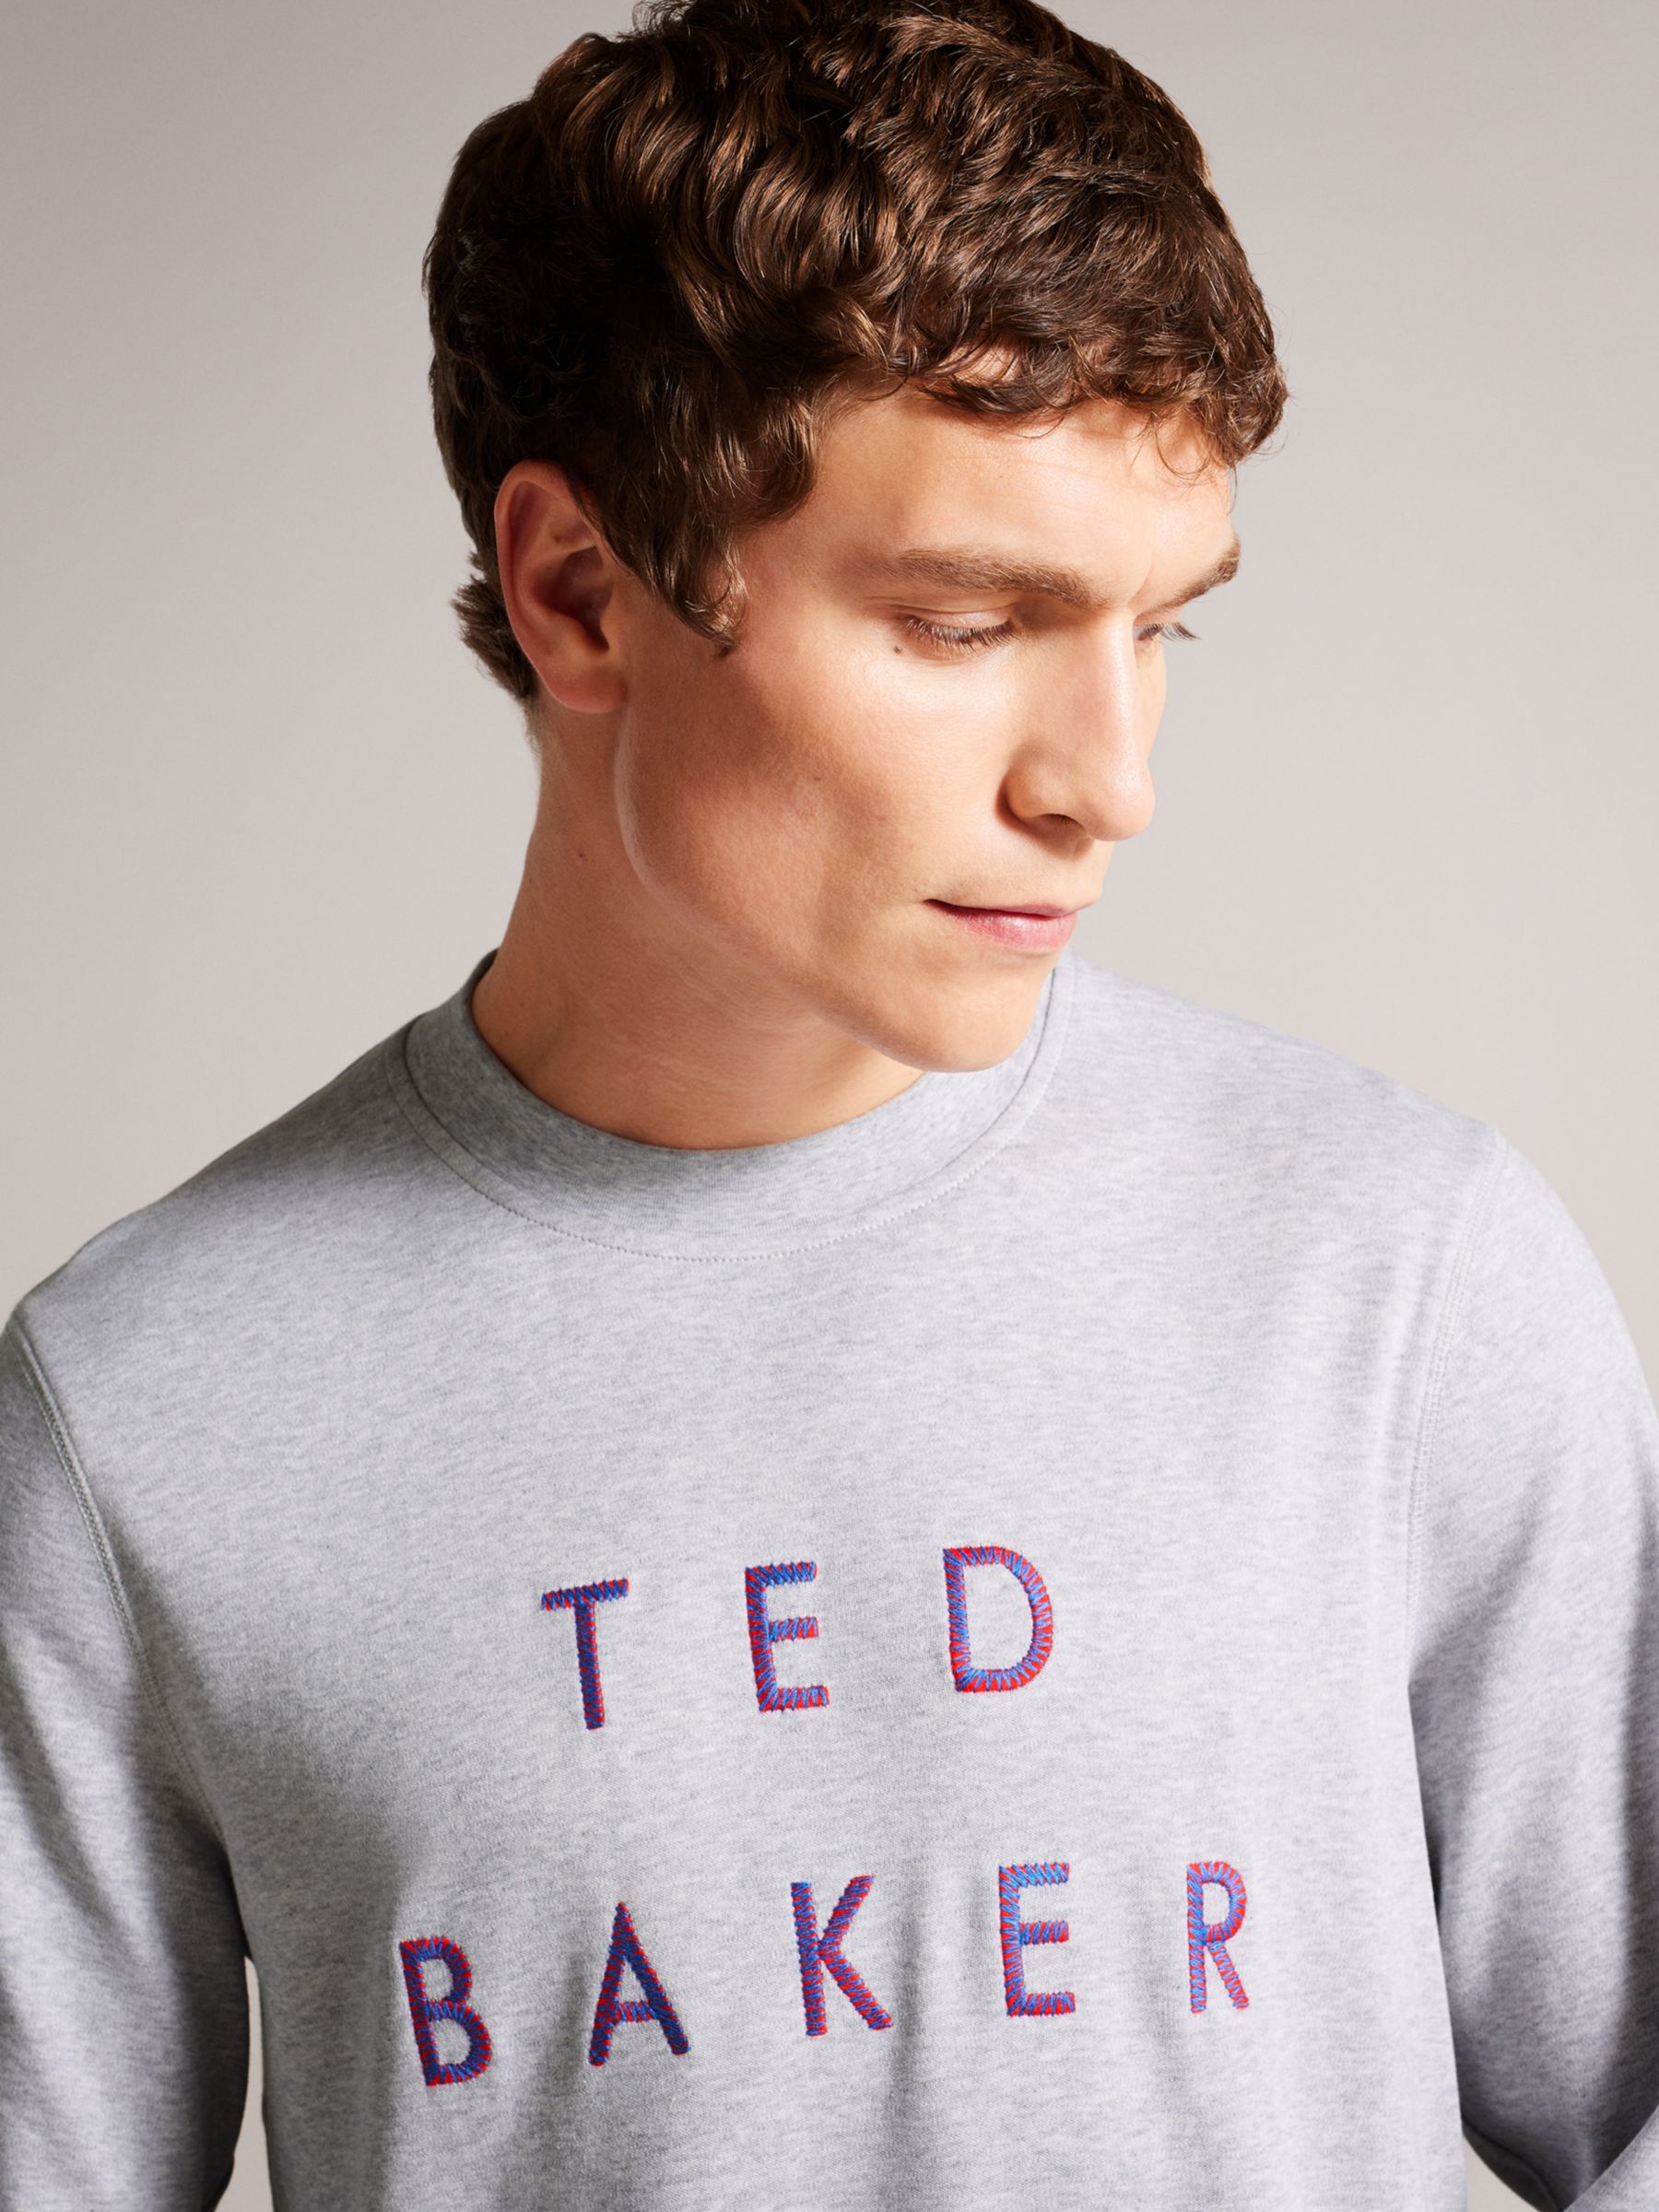 Ted Baker Embroidered Long Sleeve Jumper, Grey Marl, S